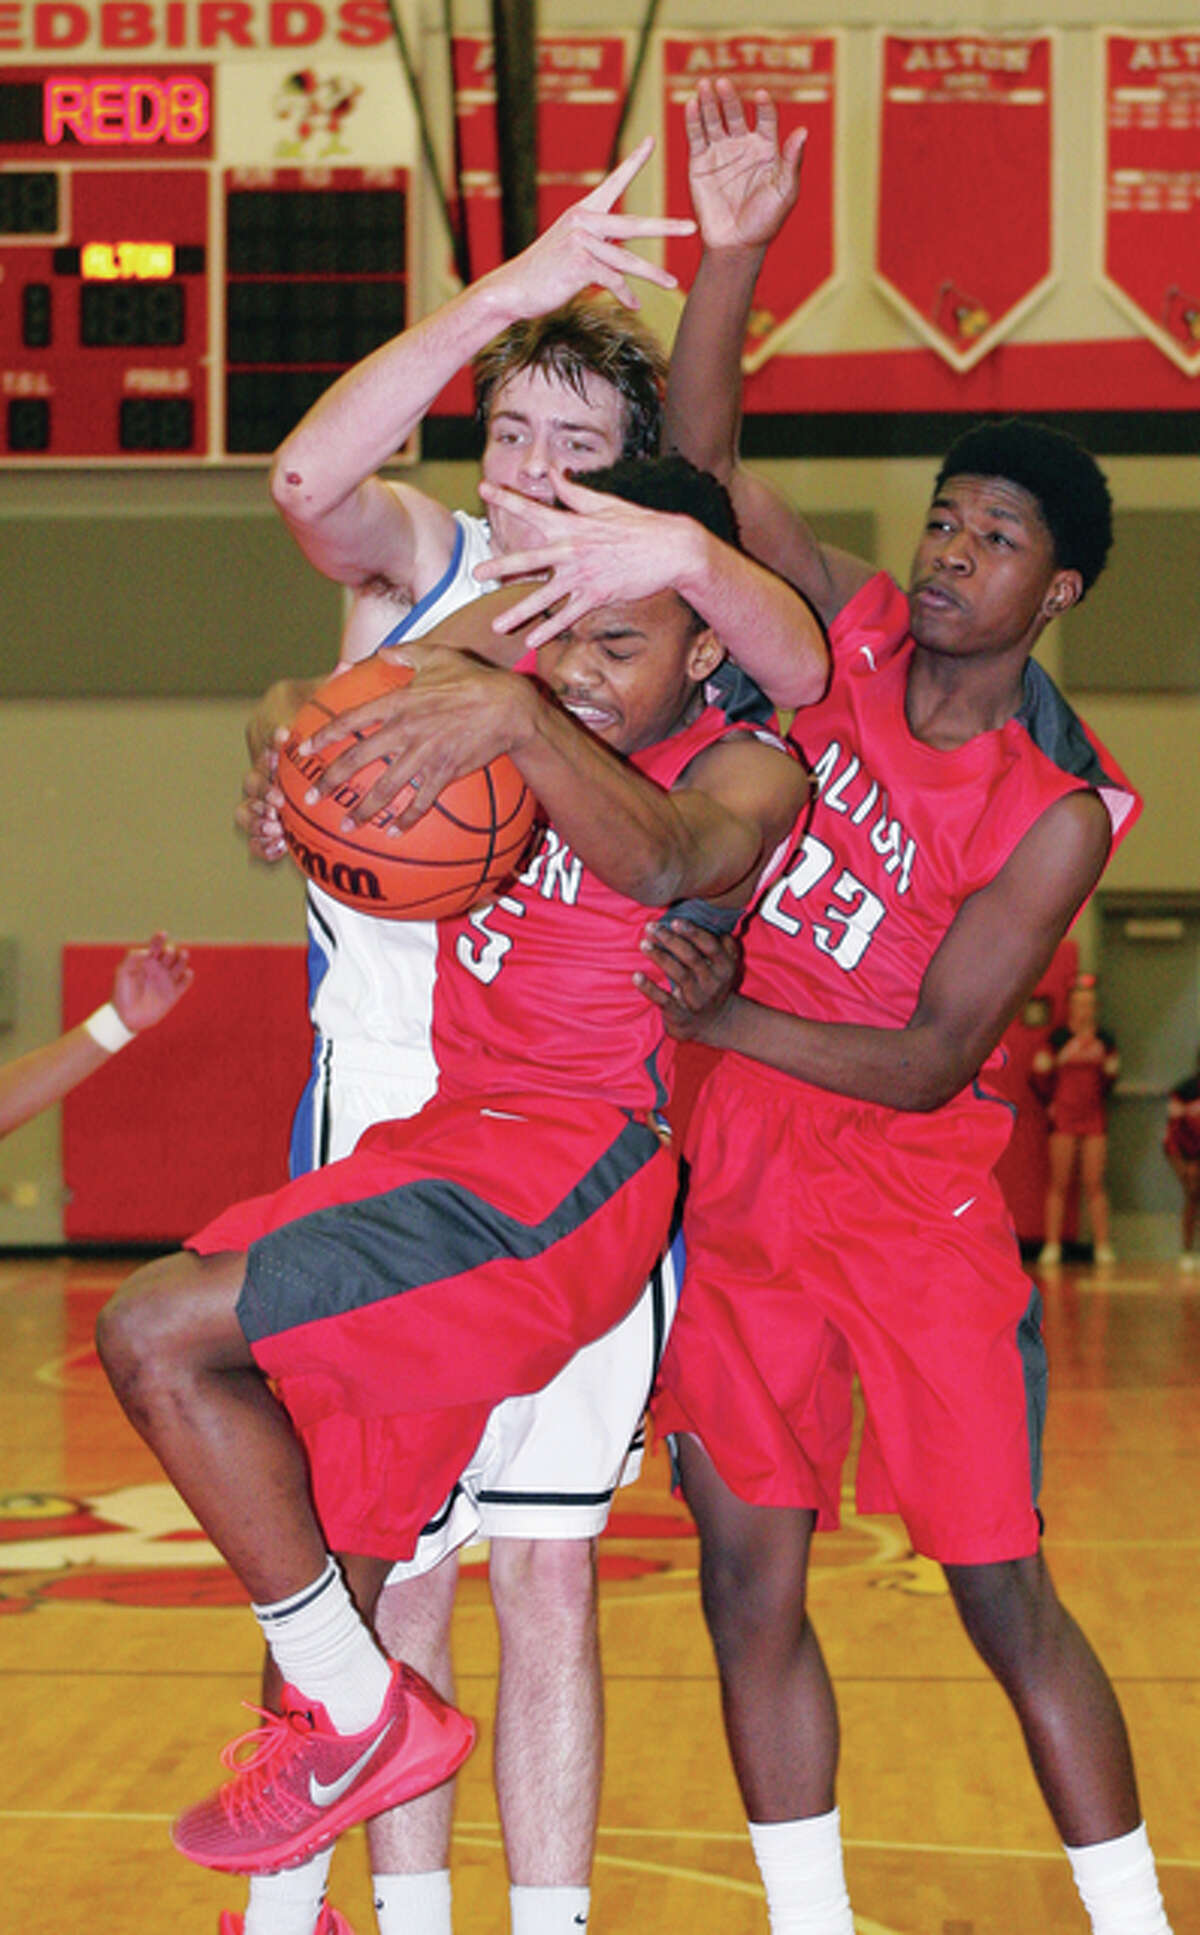 Alton’s Jordan Golley (front) beats Quincy’s Garrett Gadeke (back left) and Kevin Caldwell (right) to a rebound Friday night at Alton High.